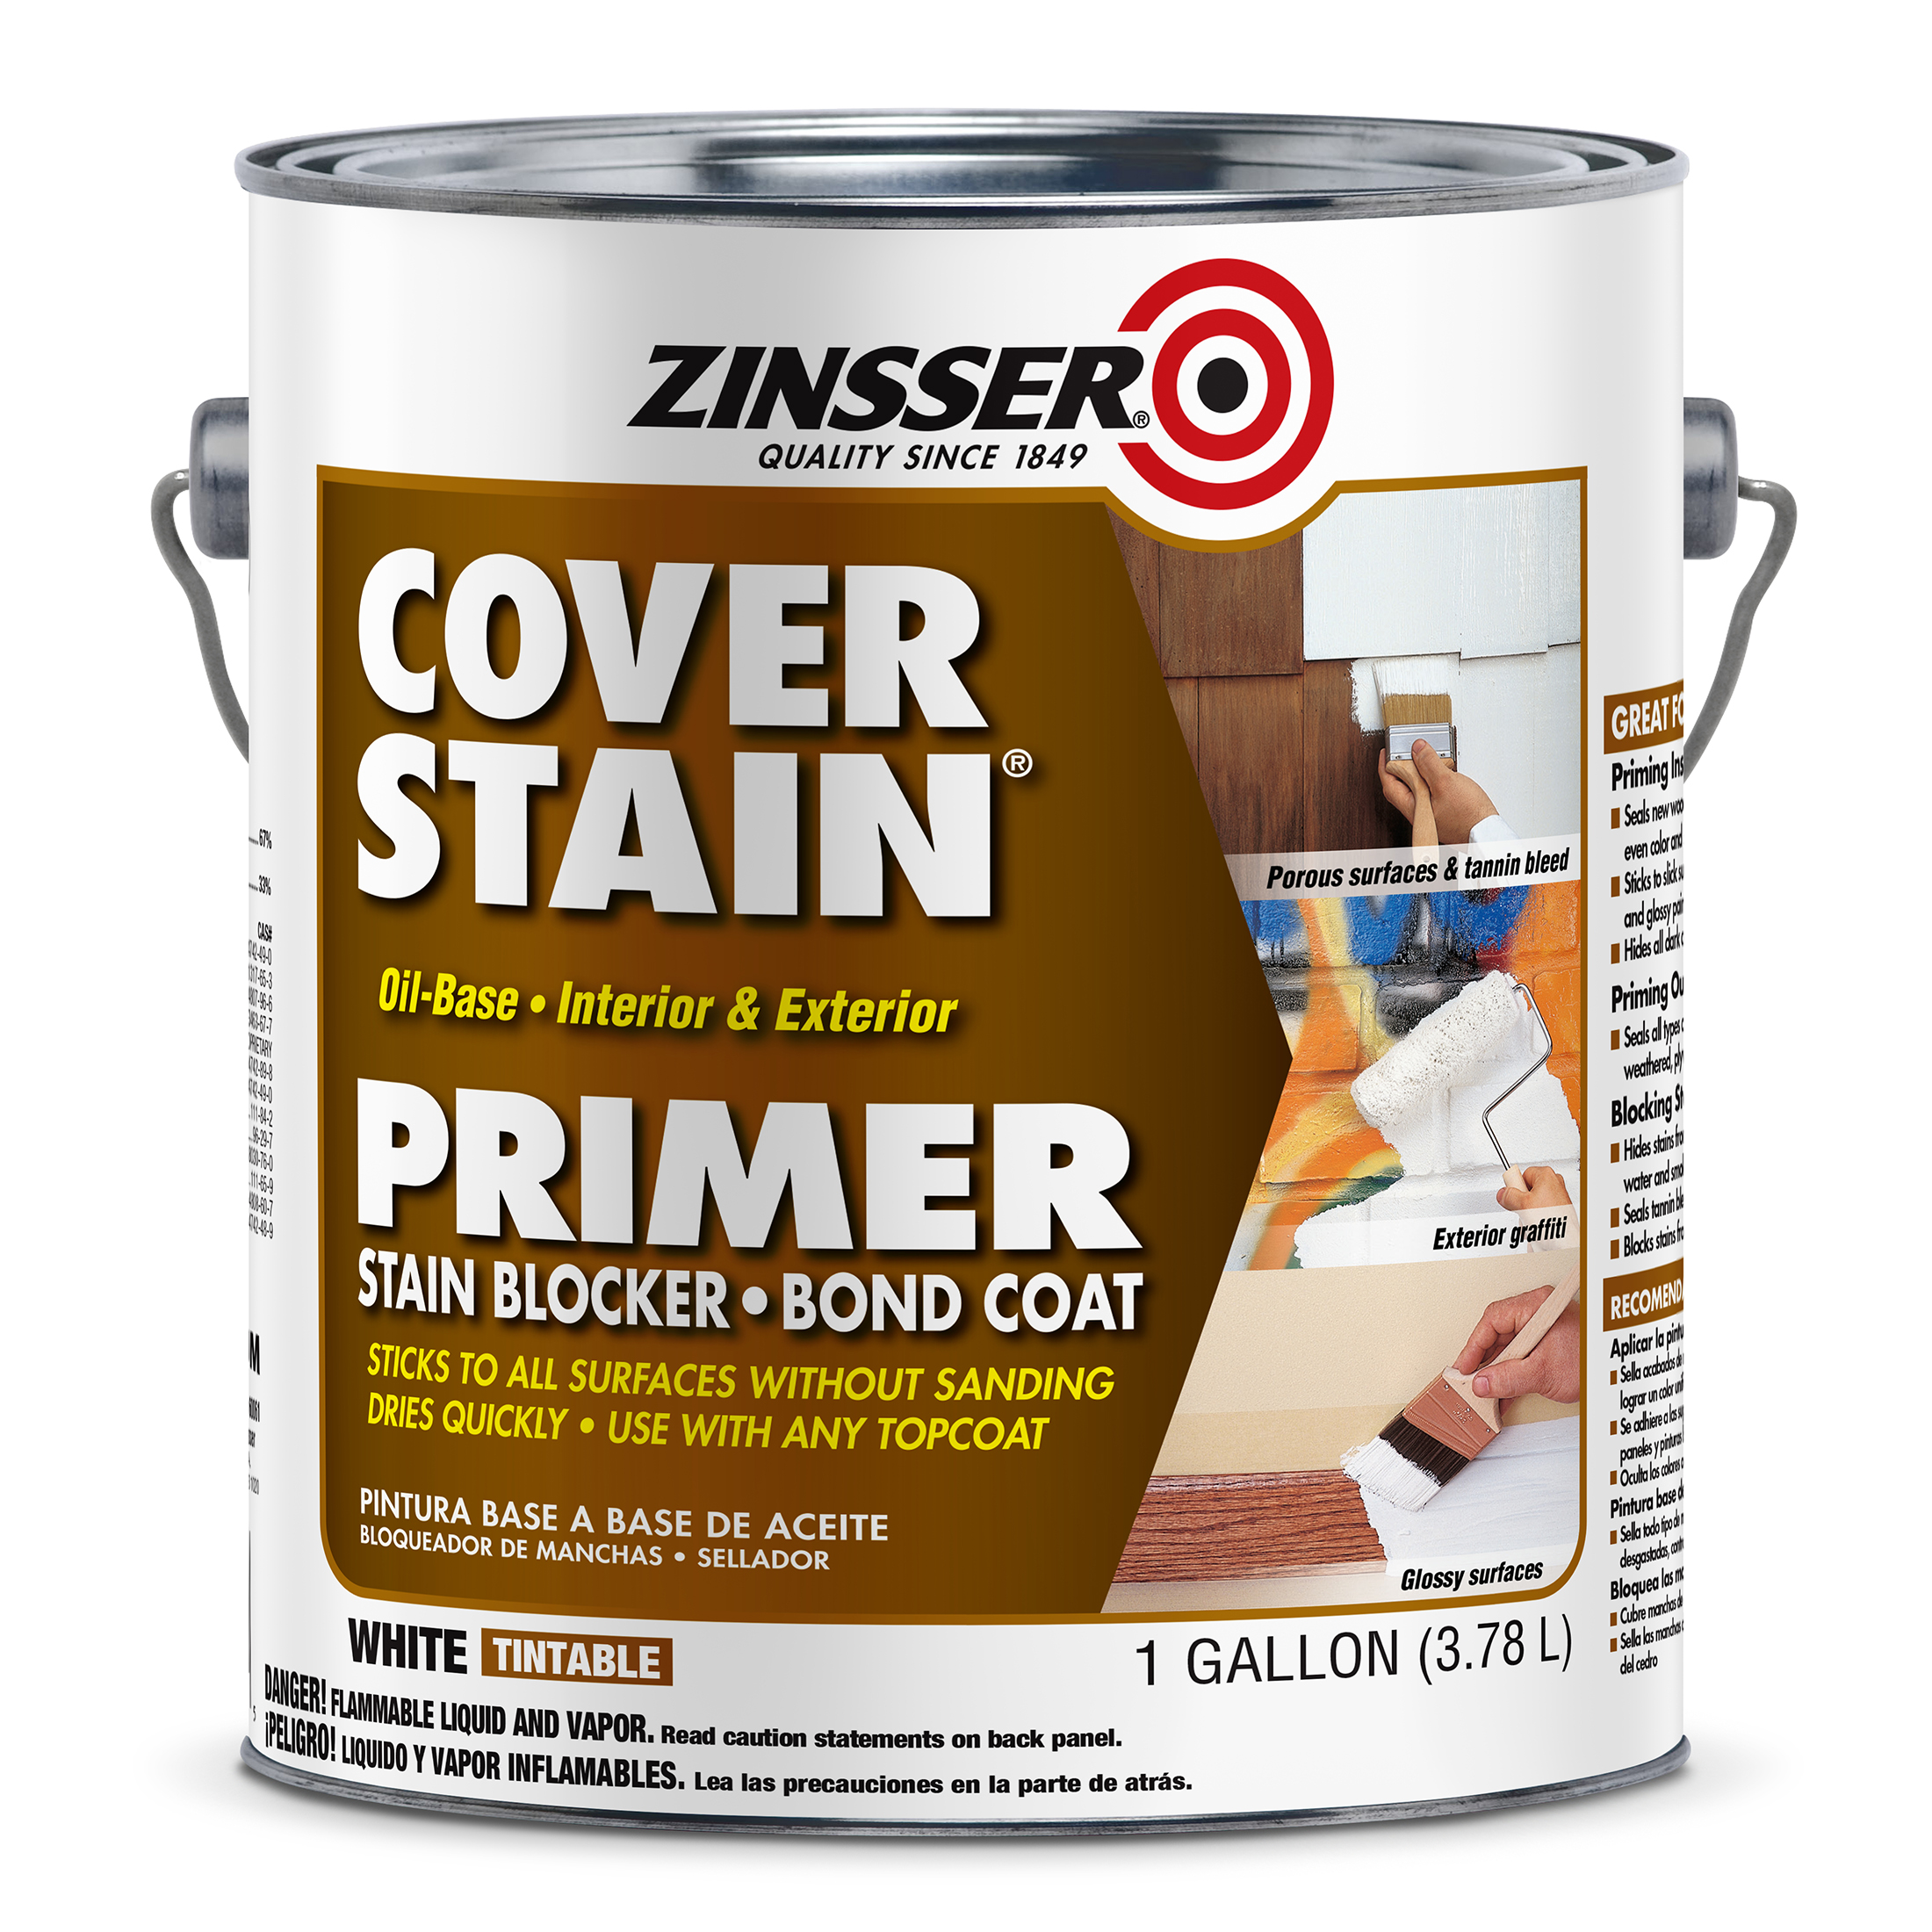 White, Zinsser Cover Stain Flat Oil-Based Interior and Exterior Primer and Sealer-3501, Gallon - image 3 of 11